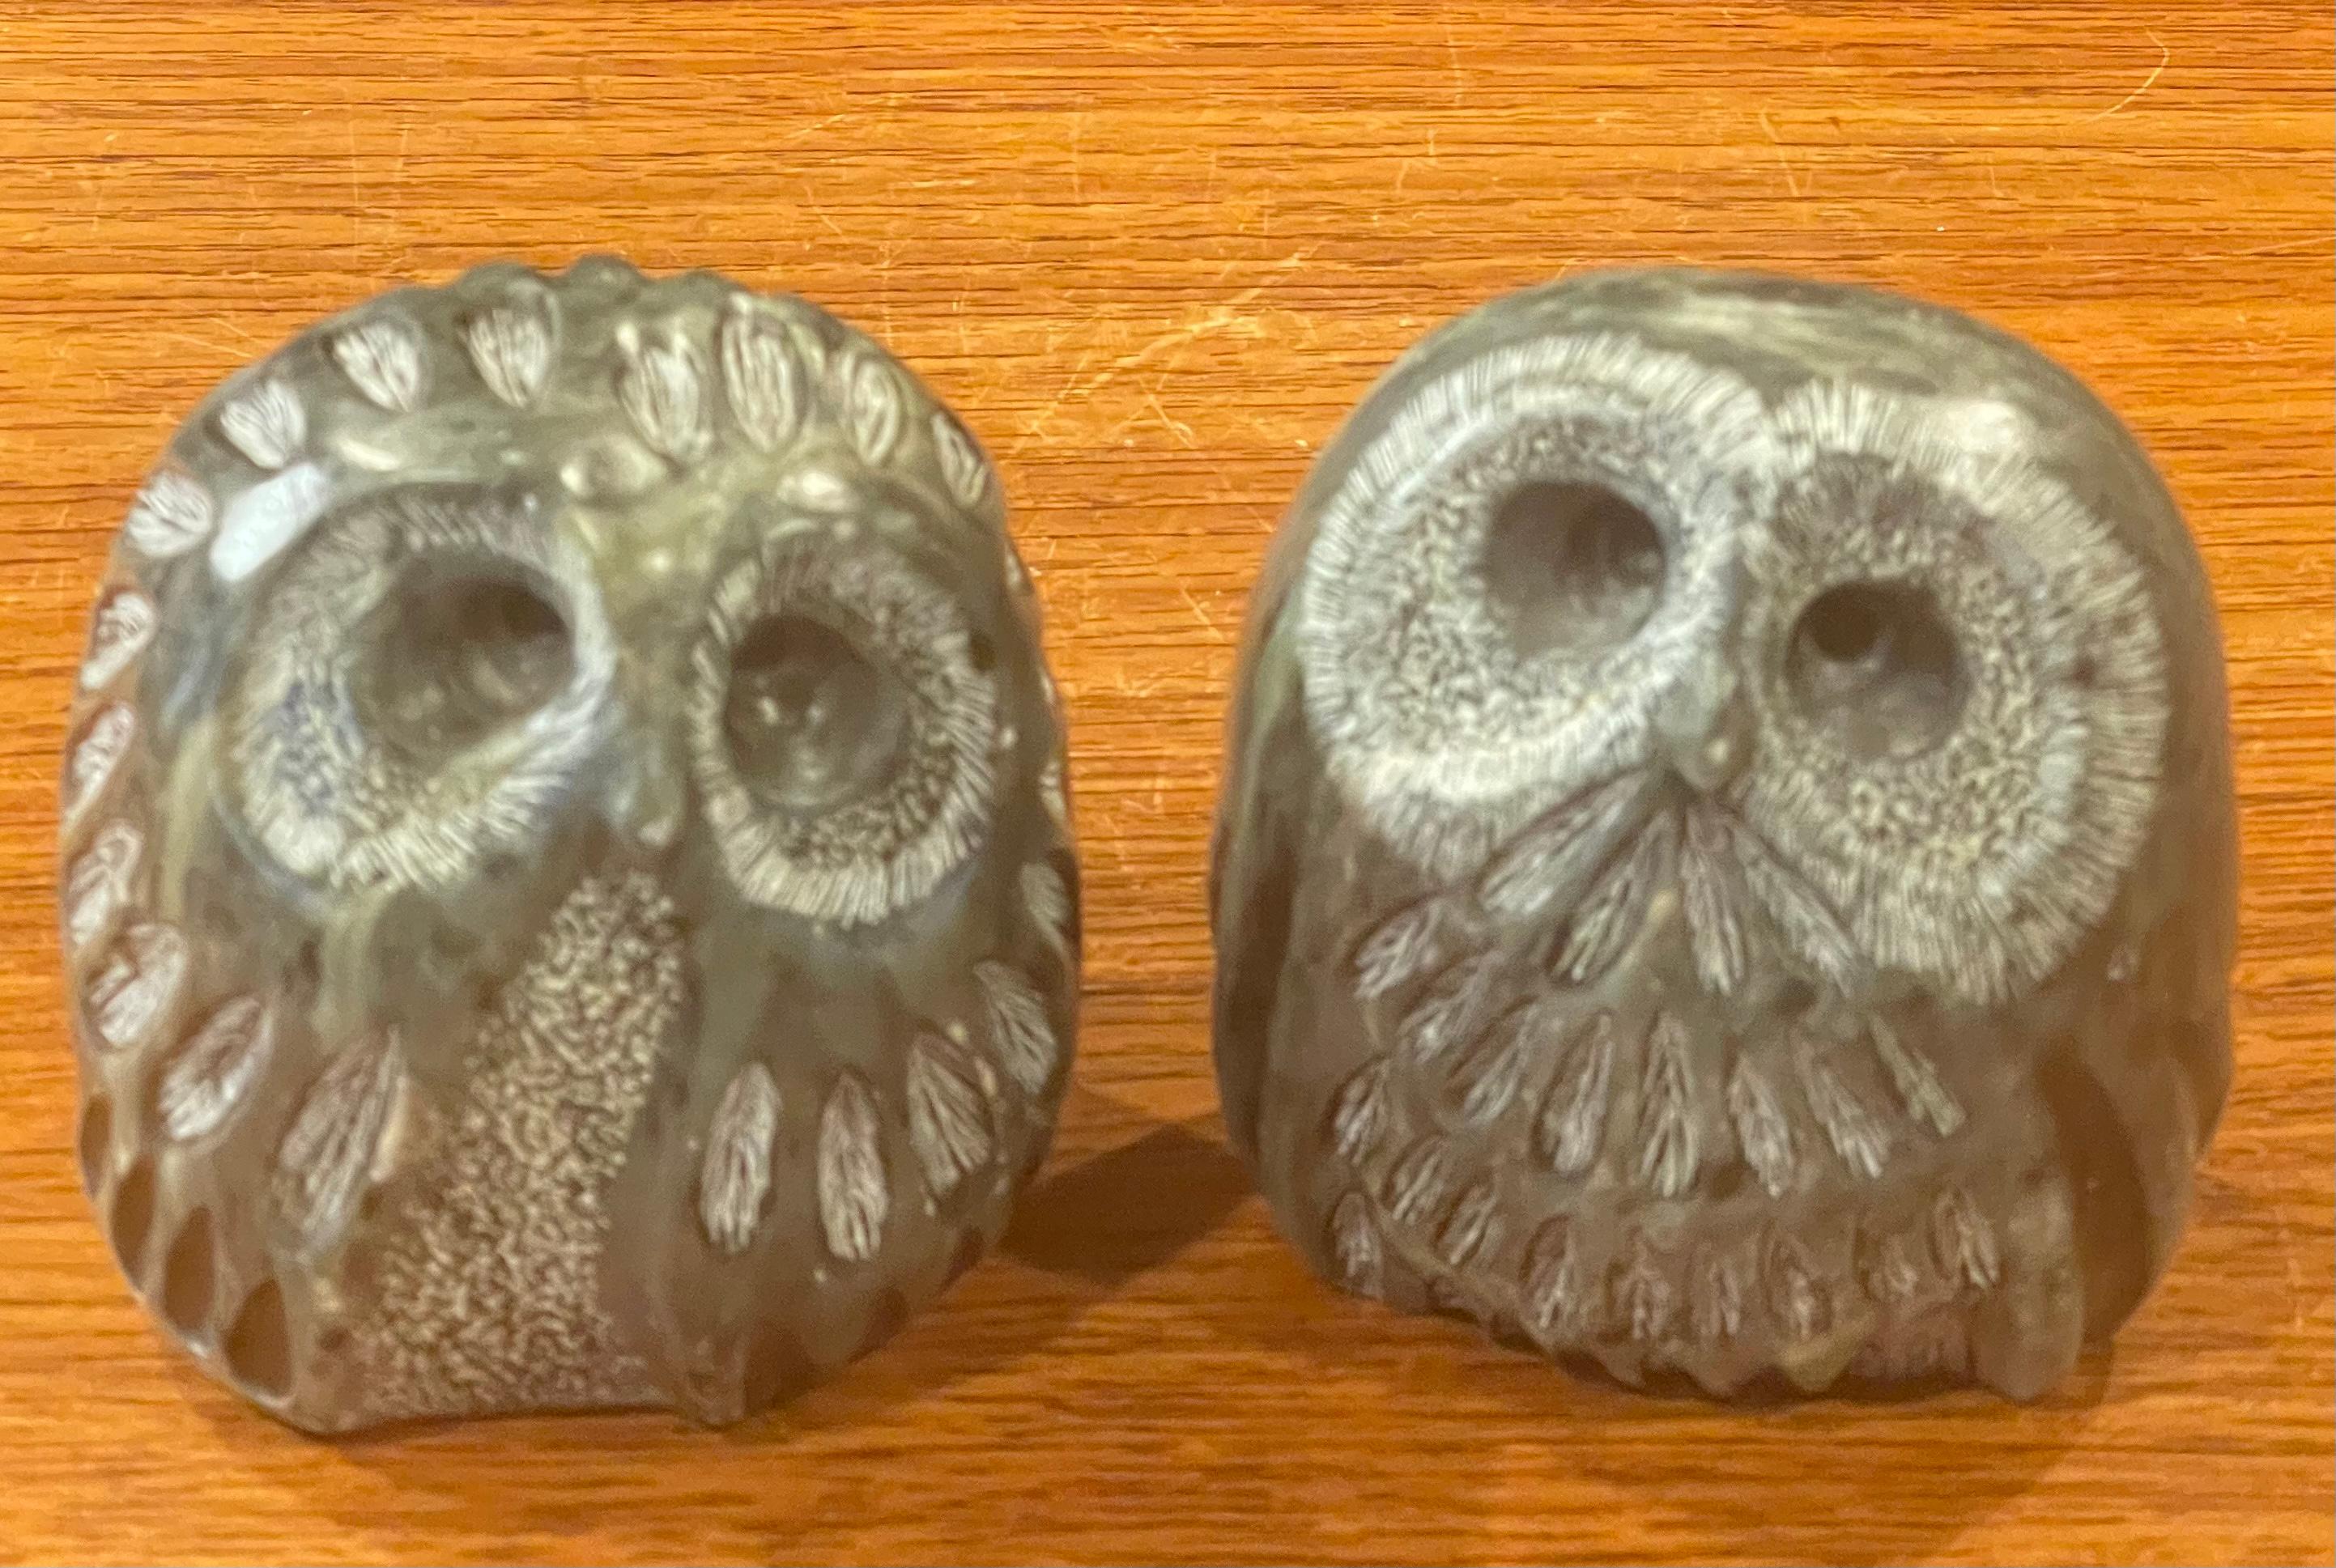 Pair of brutalist style carved soapstone owl sculptures by Glenn Heath, circa 1991. The owls are The set in very good vintage condition with no chips or cracks and each owl measures 3